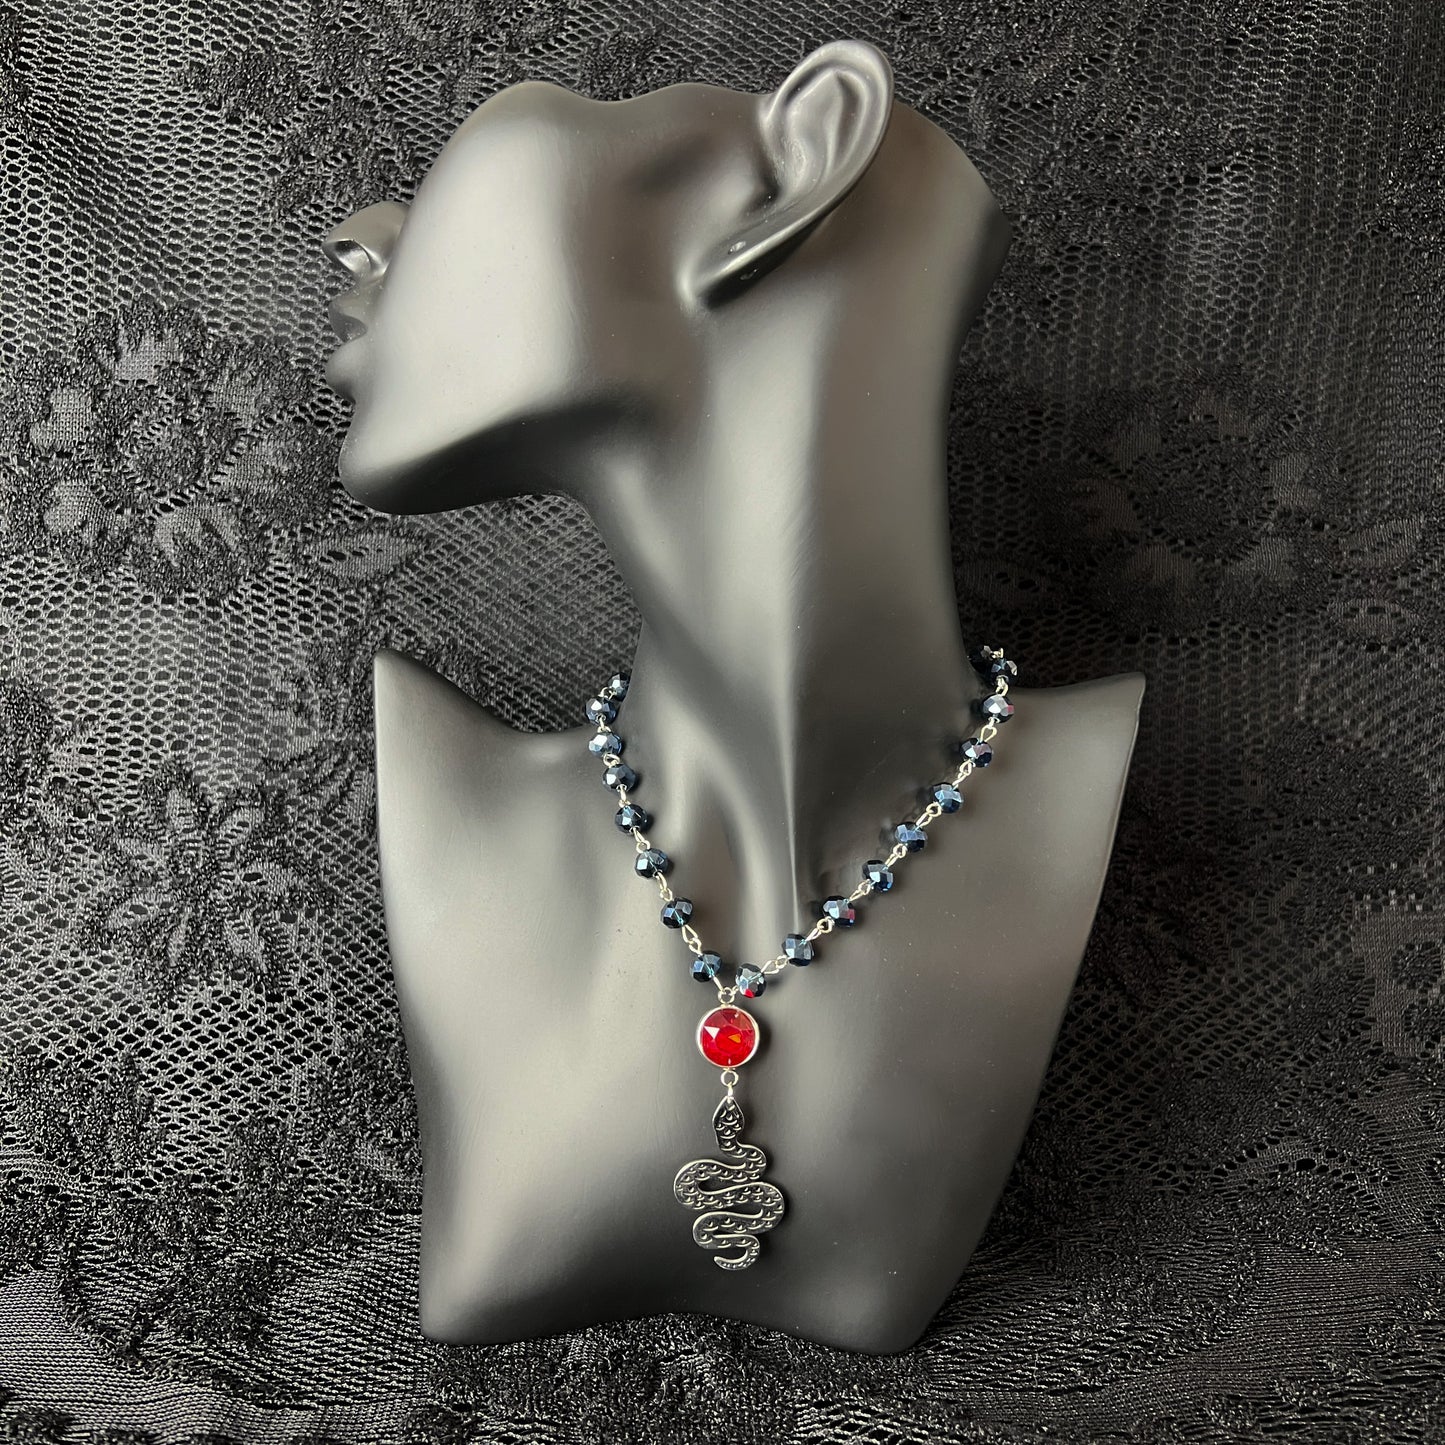 Witch choker with a snake pendant witch necklace corporate gothic rosary style occult jewelry